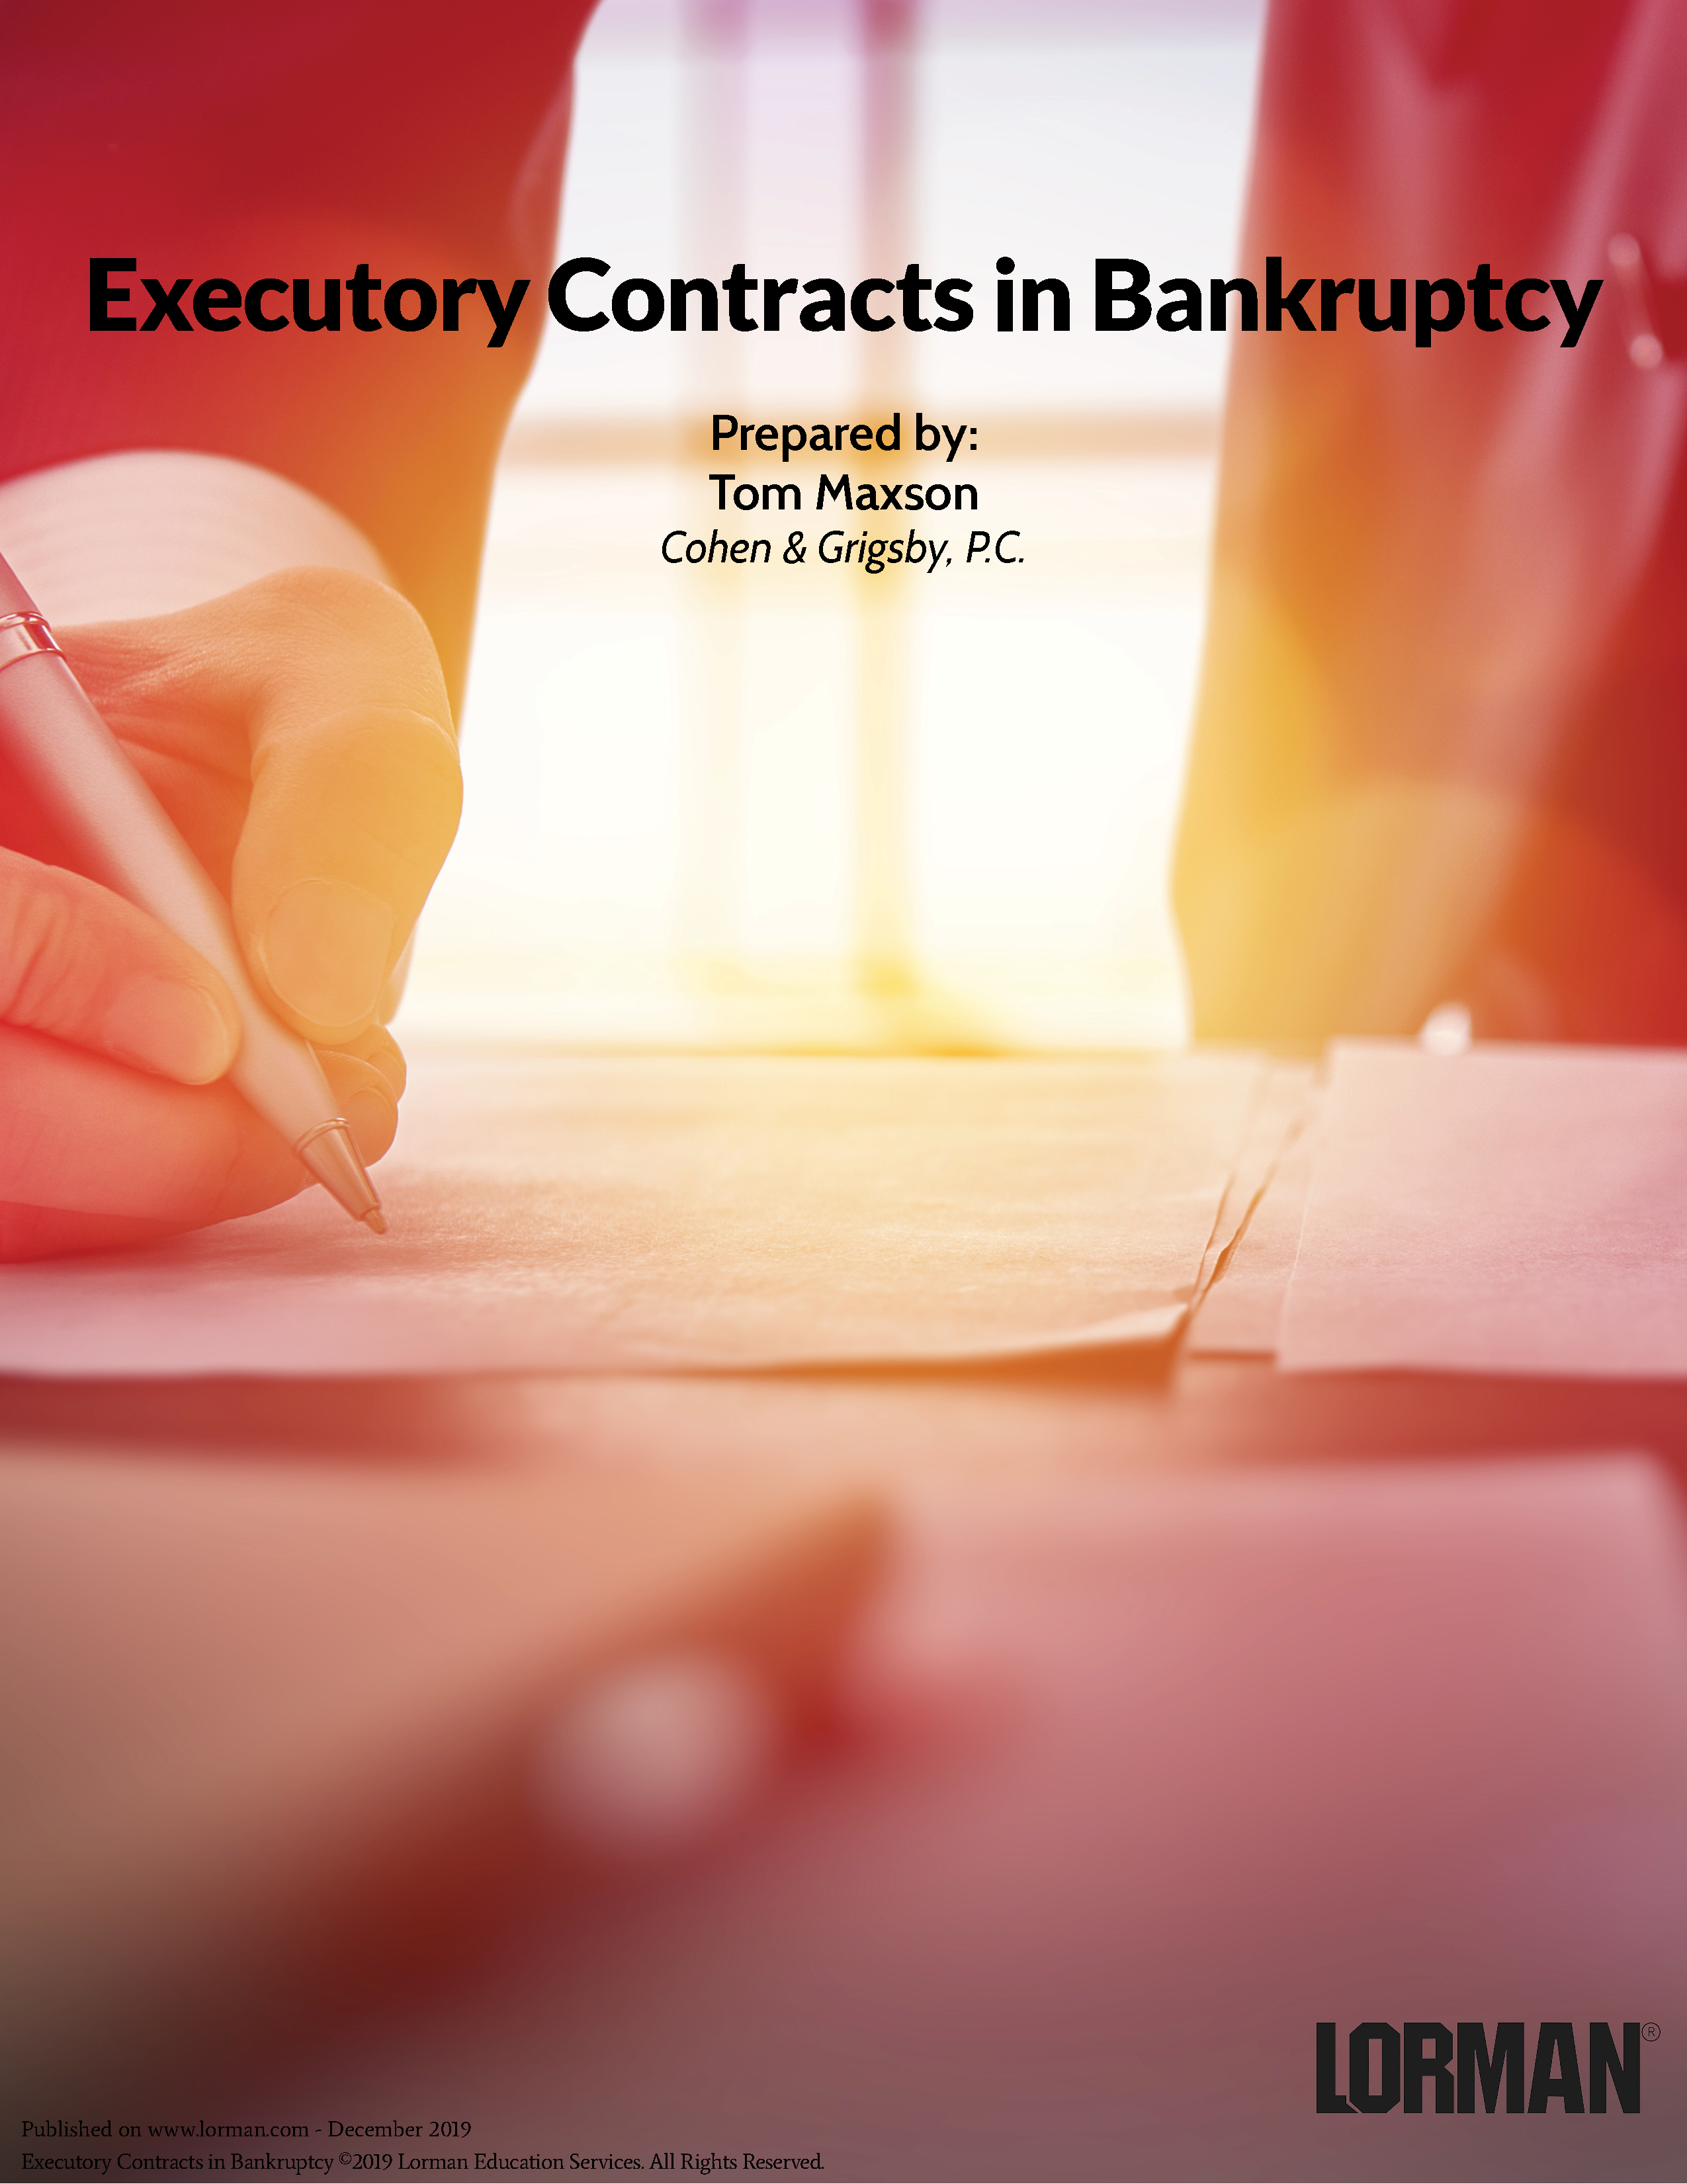 Executory Contracts in Bankruptcy